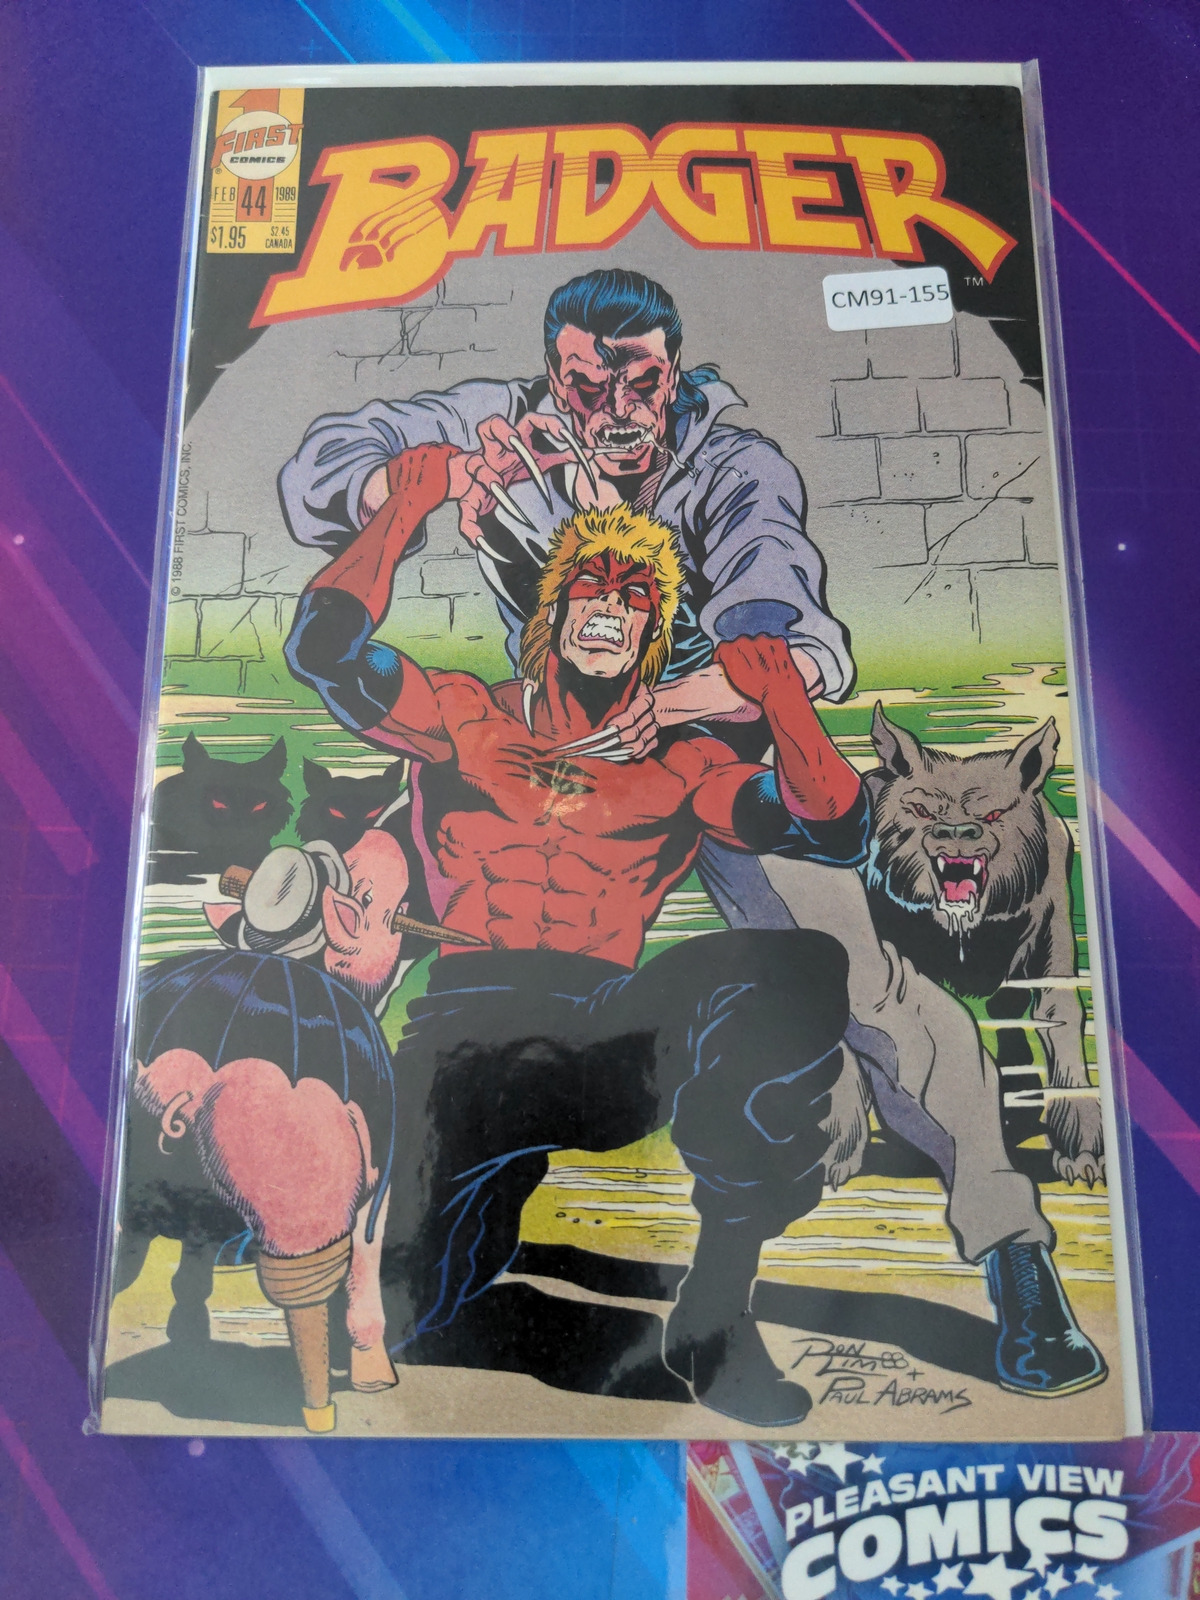 THE BADGER #44 VOL. 1 8.0 FIRST COMIC BOOK CM91-155